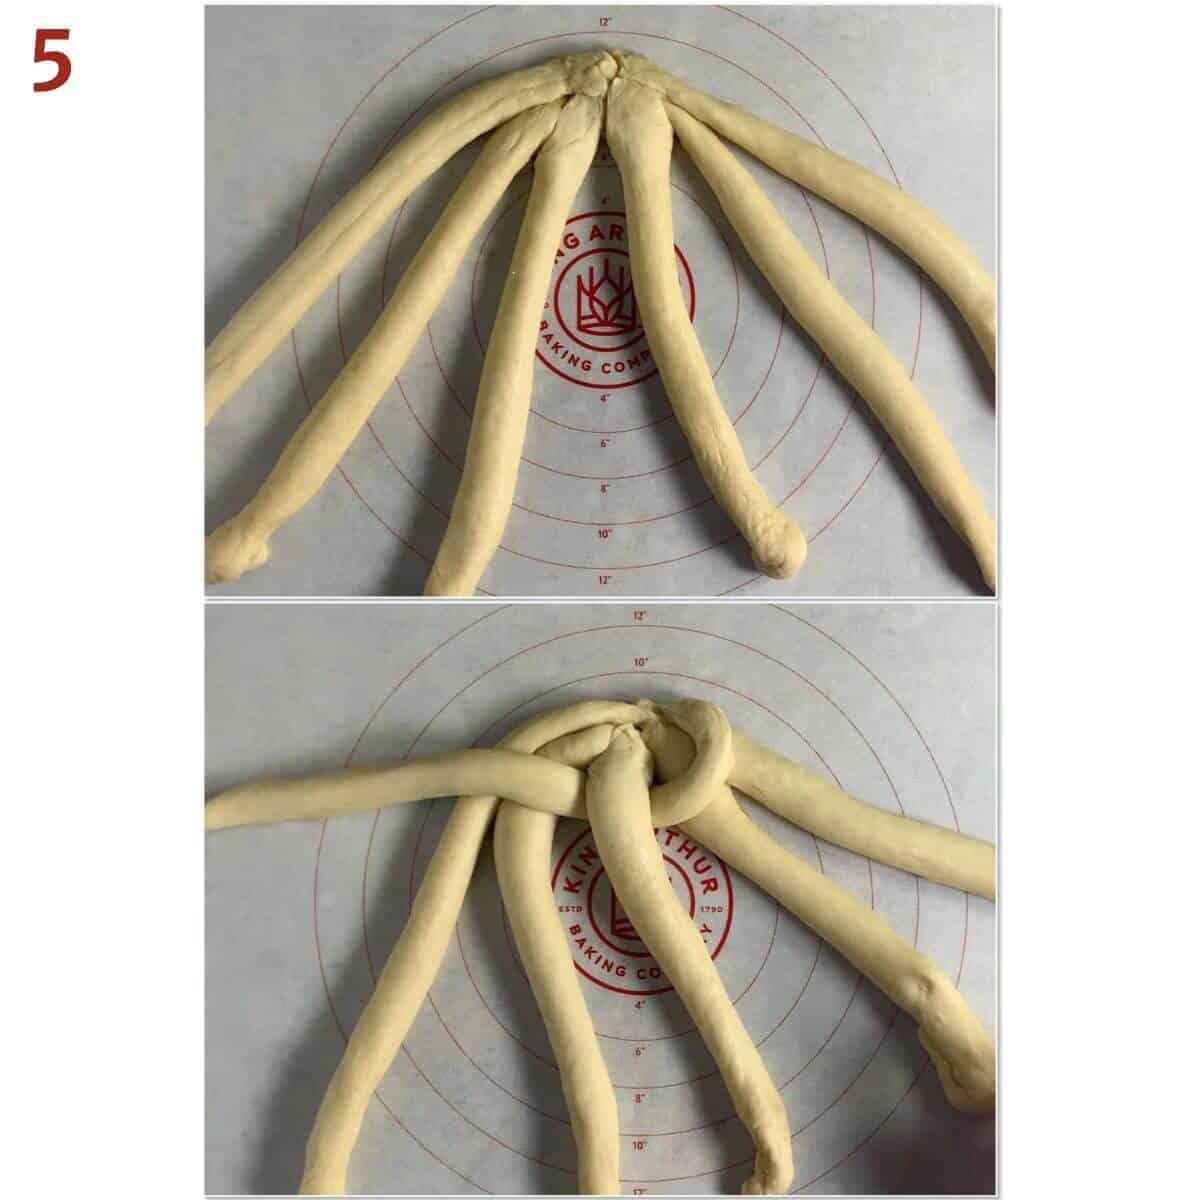 Collage of 6 strands side by side, then taking the rightmost strand and jump it over the next 2 strands, under the 3rd strand, and over the next 2 strands.